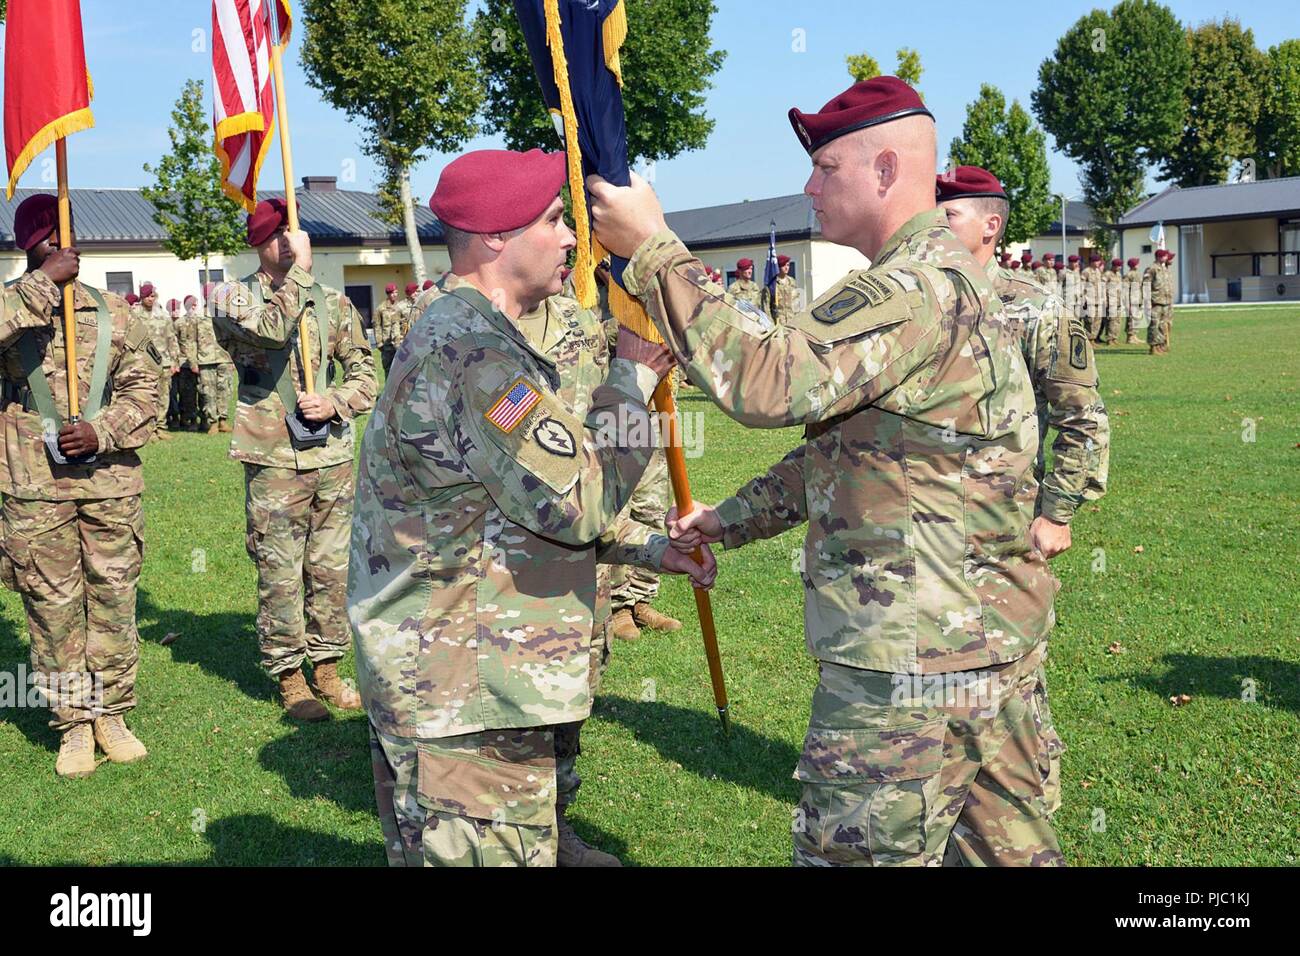 U.S. Army Command Sgt. Maj. Michael L. Palm, incoming Command Sgt. Maj. for the 1st Battalion, 503rd Infantry Regiment, 173rd Airborne Brigade (left), receives the colors to Lt. Col. Robert M. Shaw, commander of 1st Battalion, 503rd Infantry Regiment, 173rd Airborne Brigade, during the change of responsibility ceremony at Caserma Ederle in Vicenza, Italy, July 19, 2018. The 173rd Airborne Brigade is the U.S. Army Contingency Response Force in Europe, capable of projecting ready forces anywhere in the U.S. European, Africa or Central Commands' areas of responsibility. Stock Photo